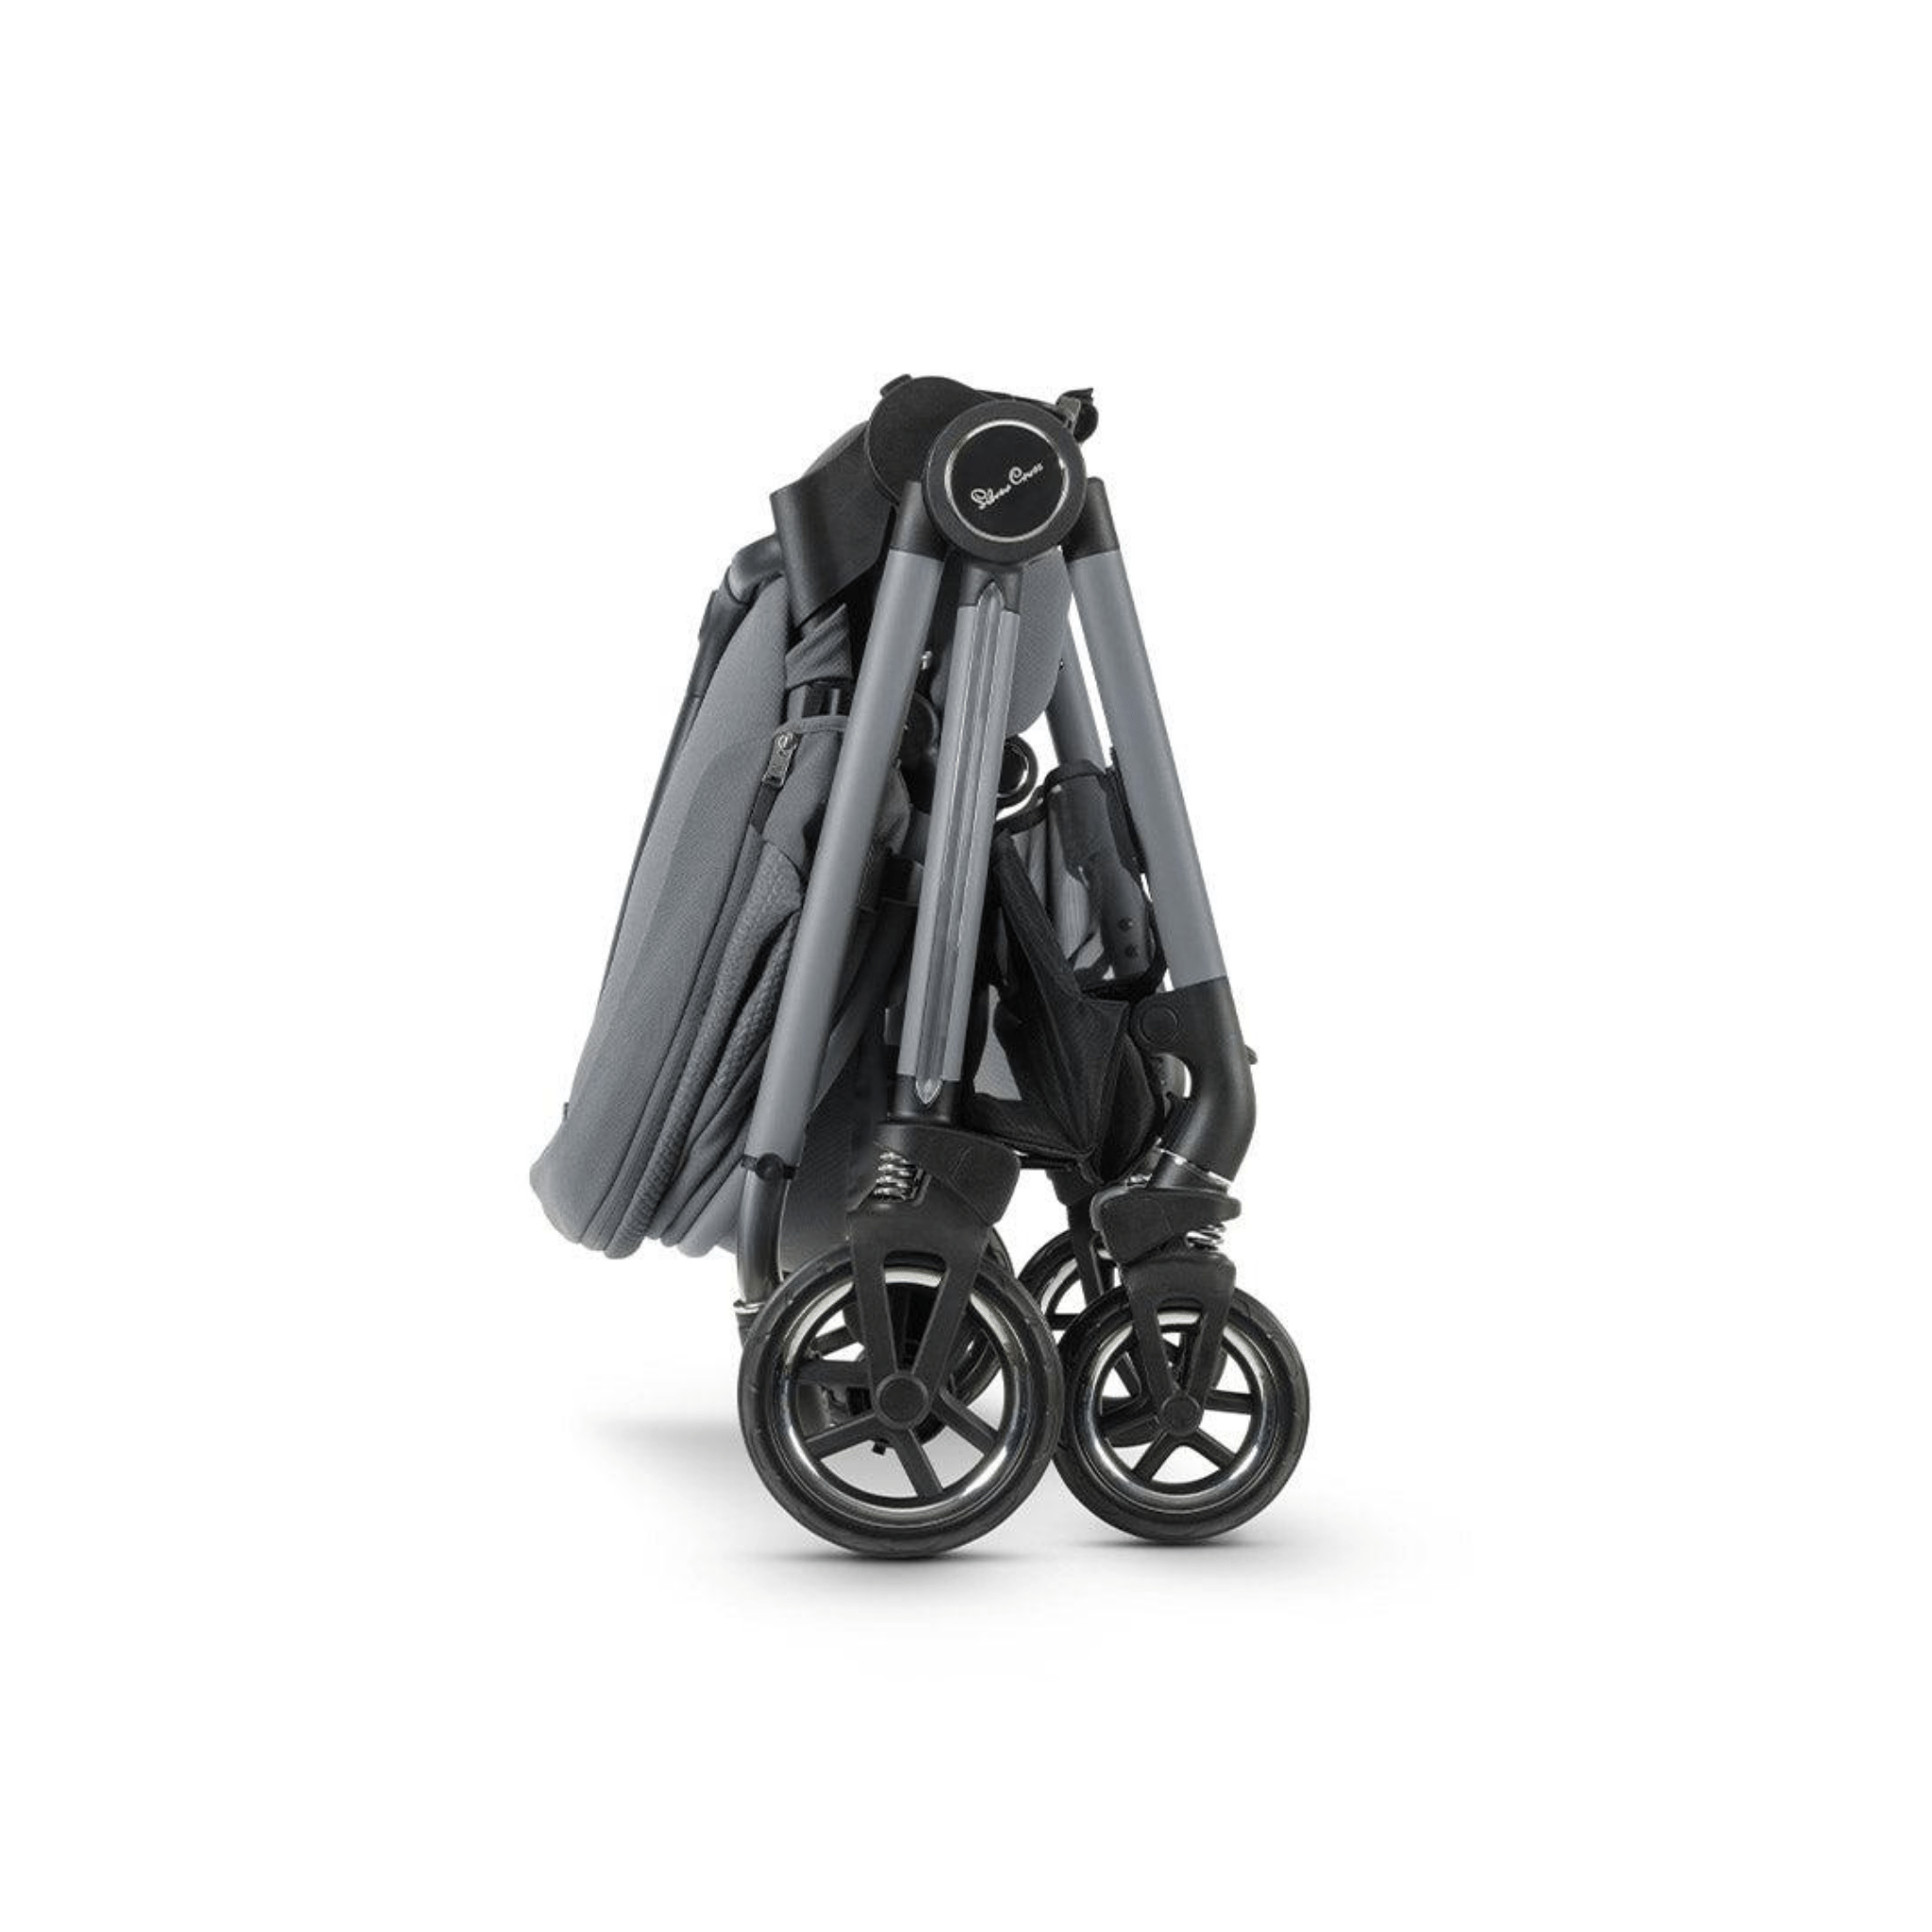 Silver Cross Dune Ultimate Travel System with Folding Carrycot in Glacier Travel Systems KTDU.GL3